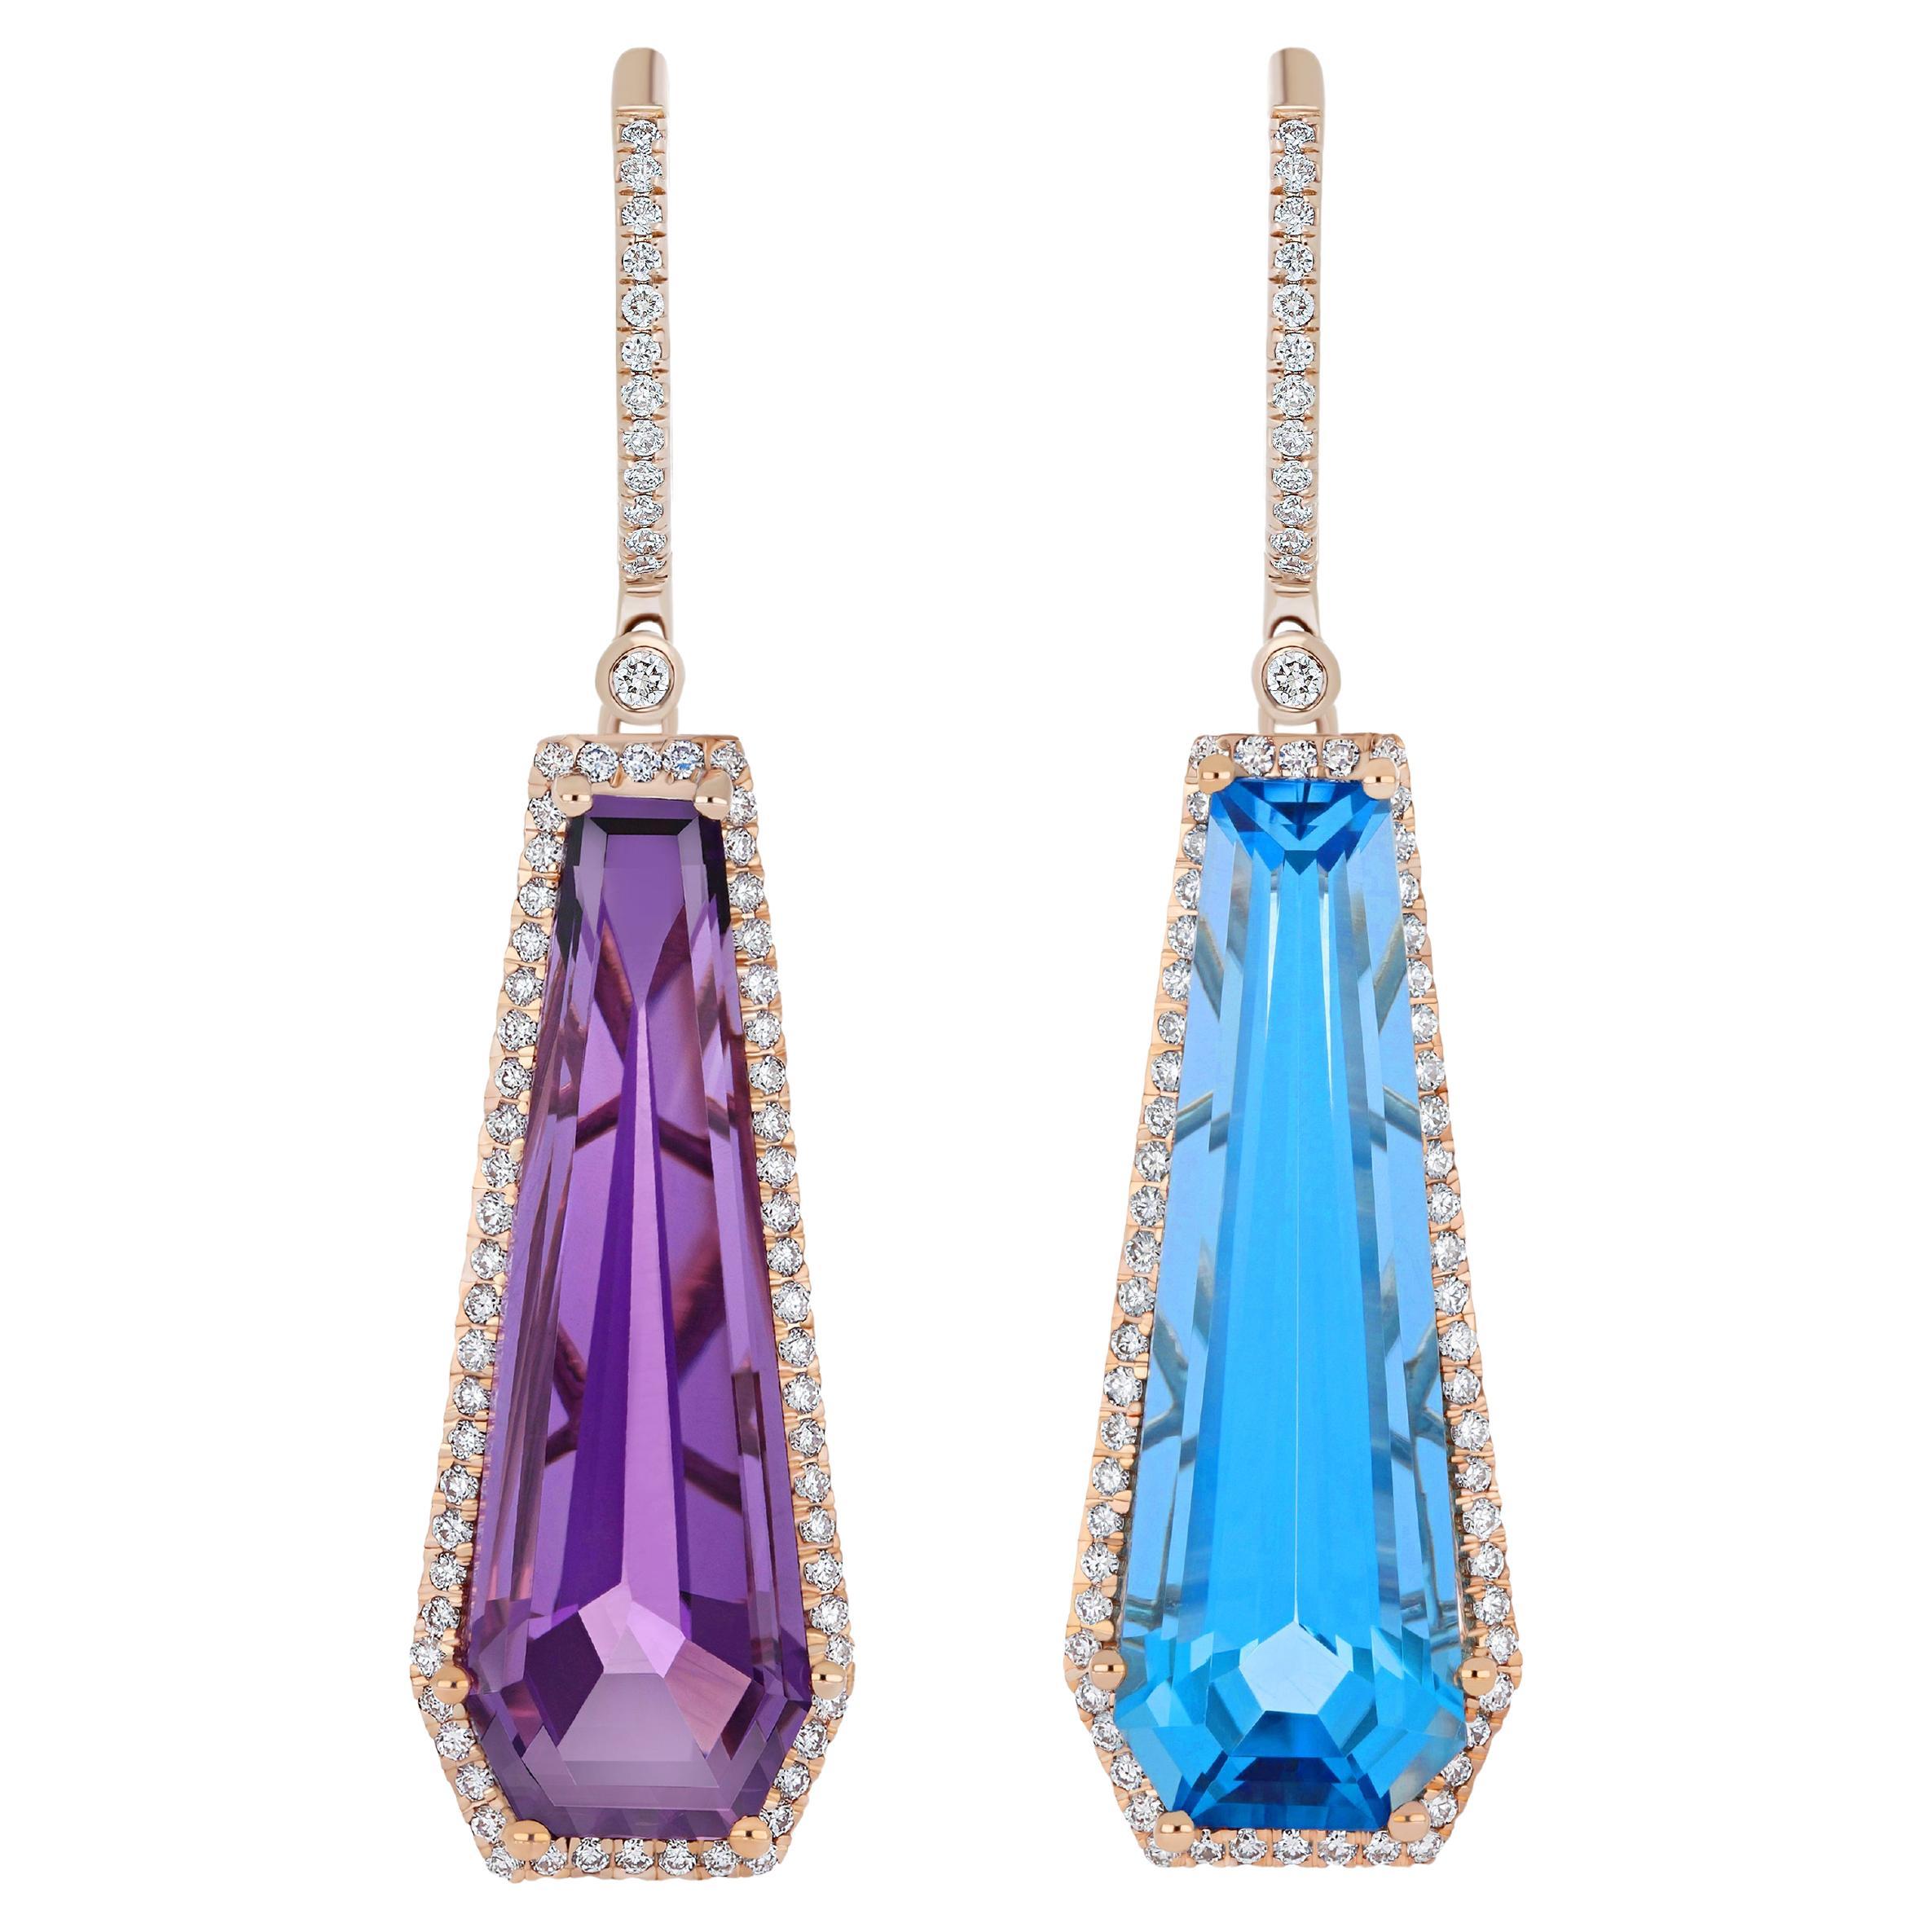 Amethyst, Blue Topaz and Diamond "Mis-Matched" Earring in 14 Karat Yellow Gold